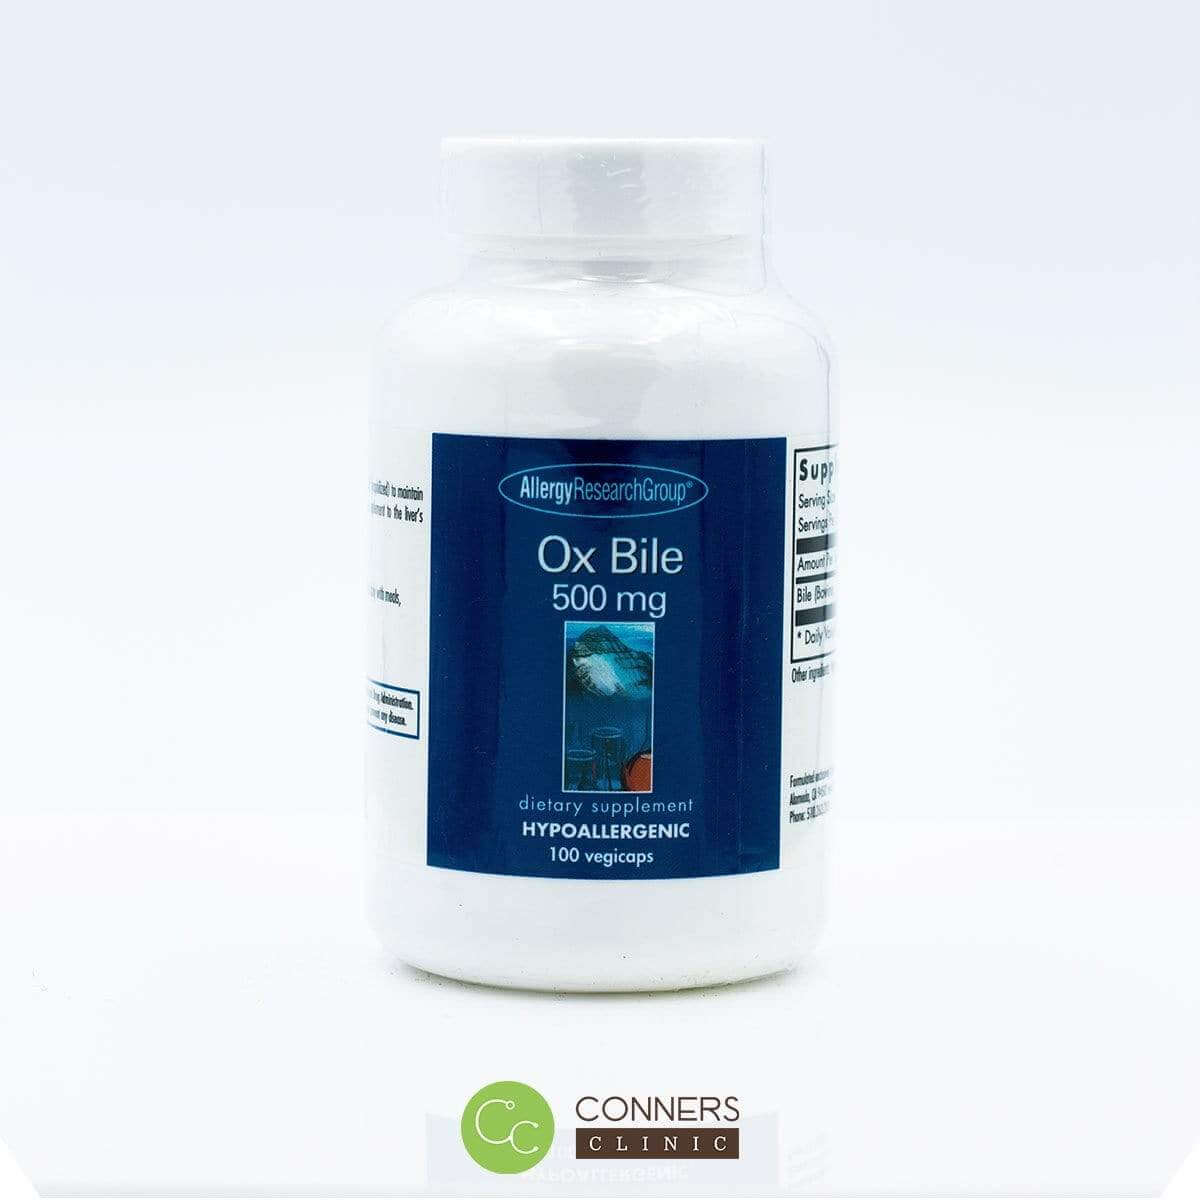 Ox Bile 500mg Allergy Research Group Supplement - Conners Clinic